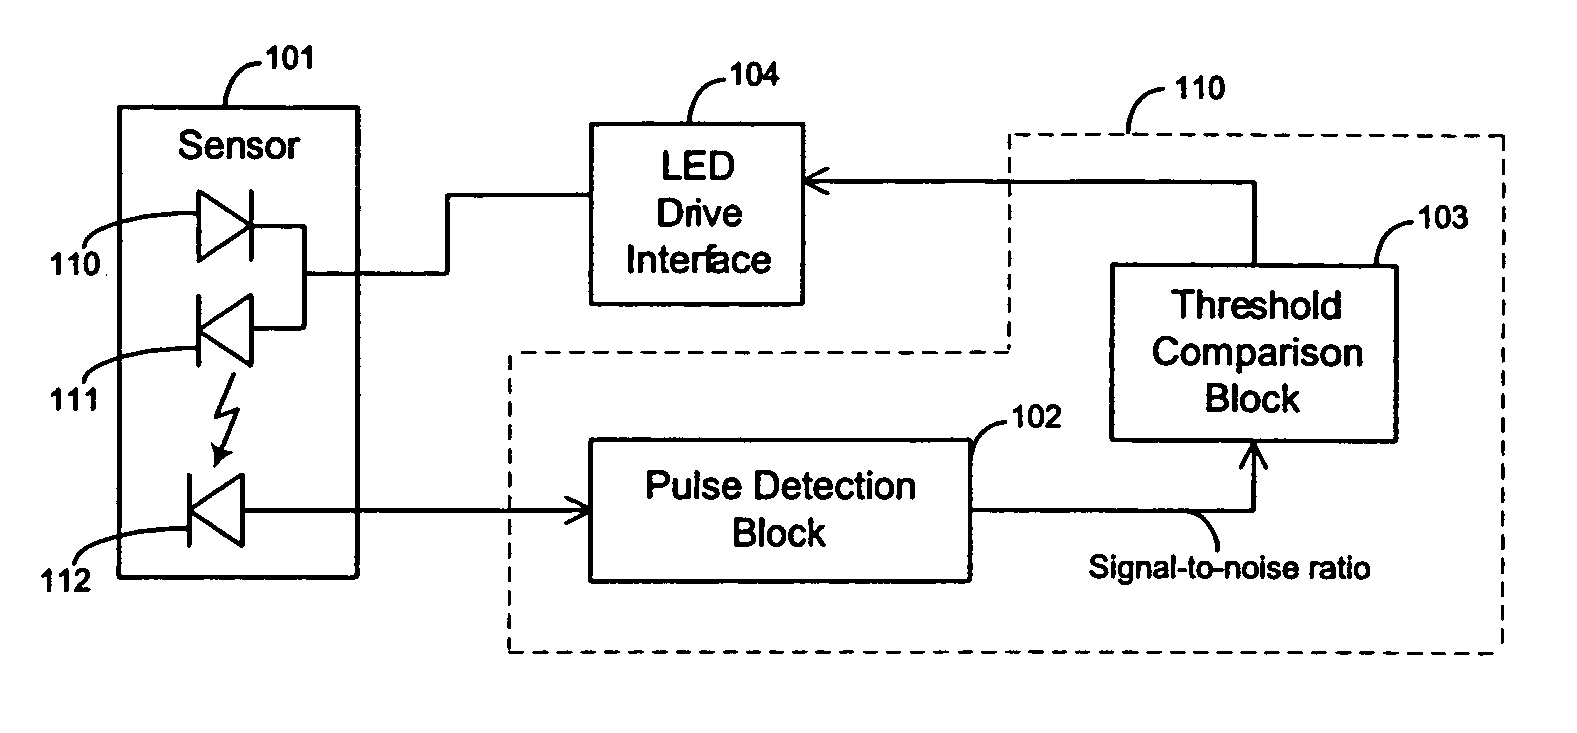 Techniques for detecting heart pulses and reducing power consumption in sensors